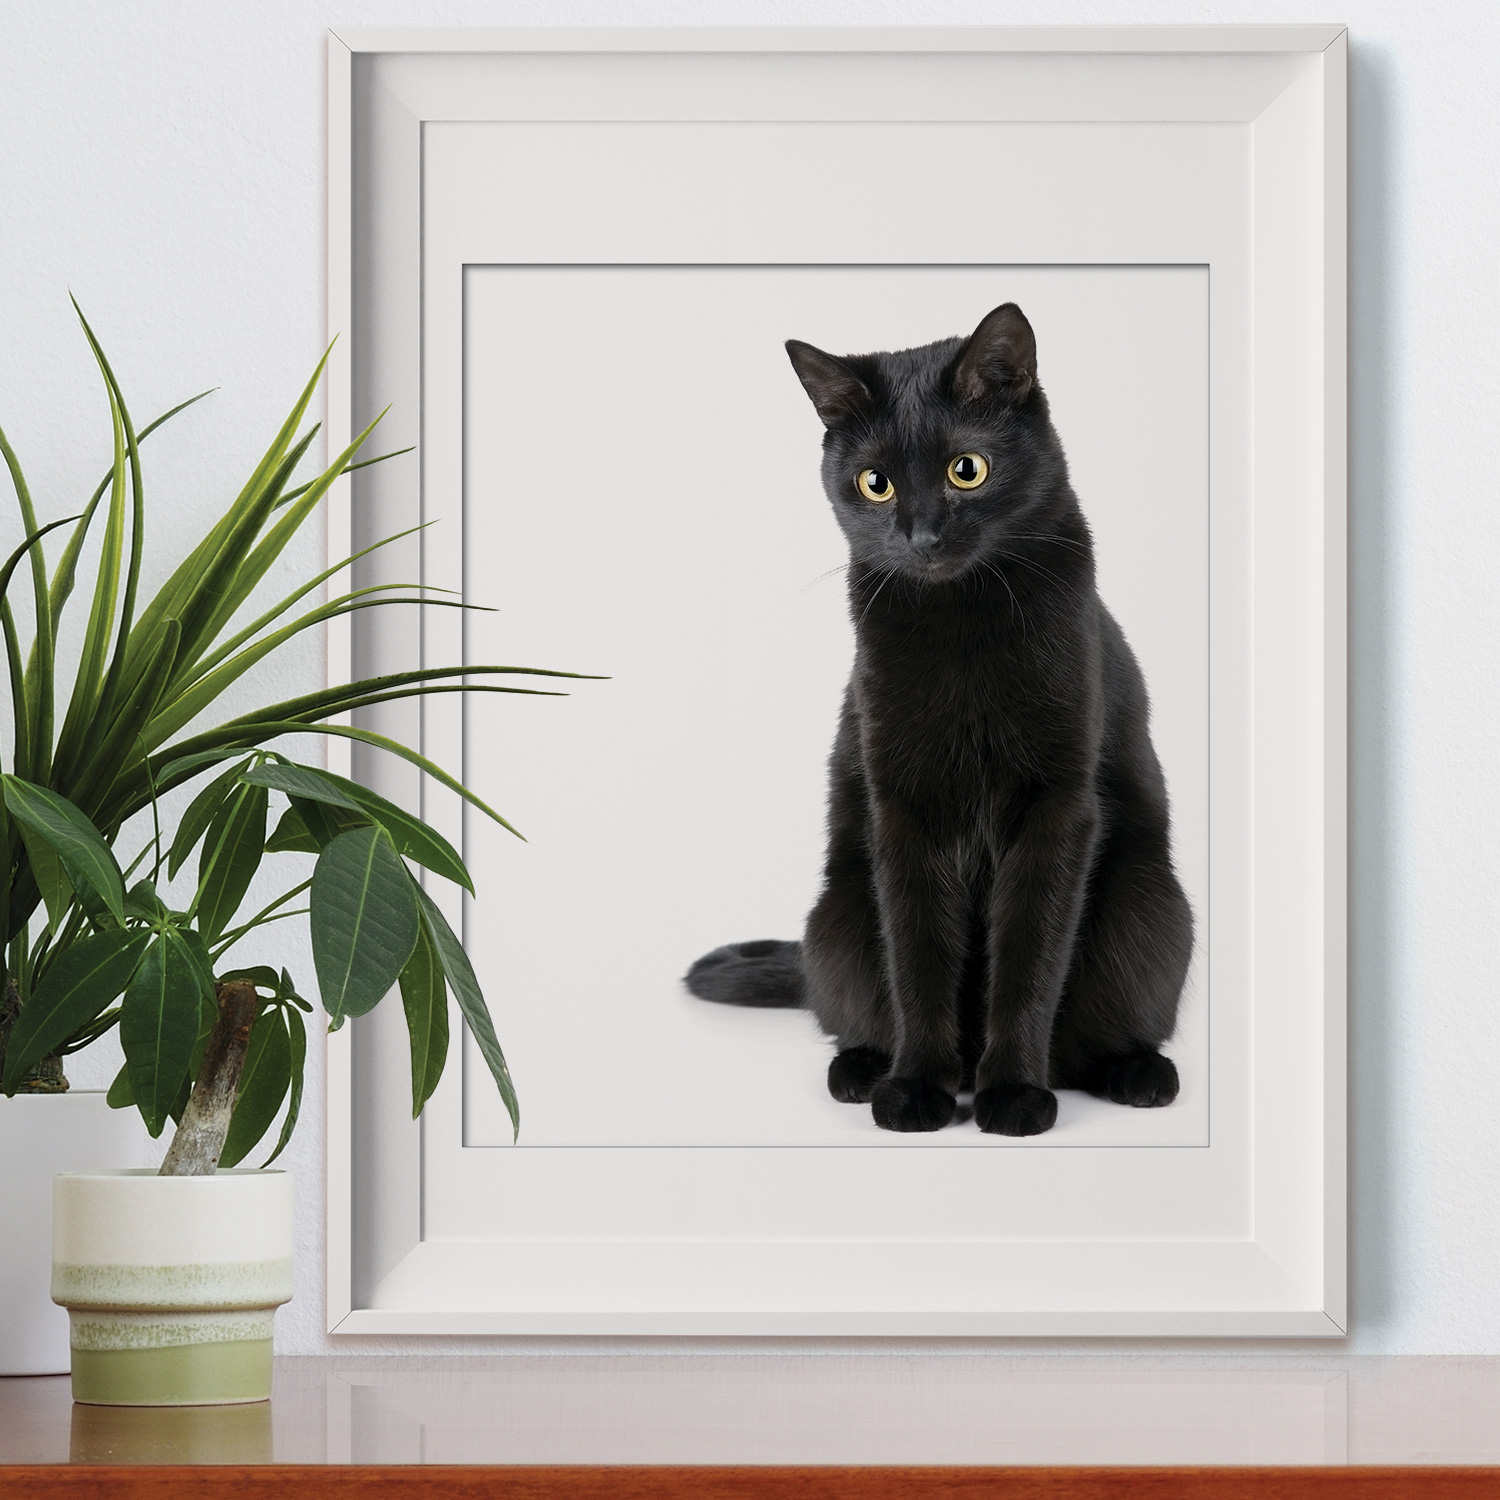 Details about   Walplus Wall Sticker Decal Wall Art 2in1 Cute Black Cat ThinkingHome Decorations